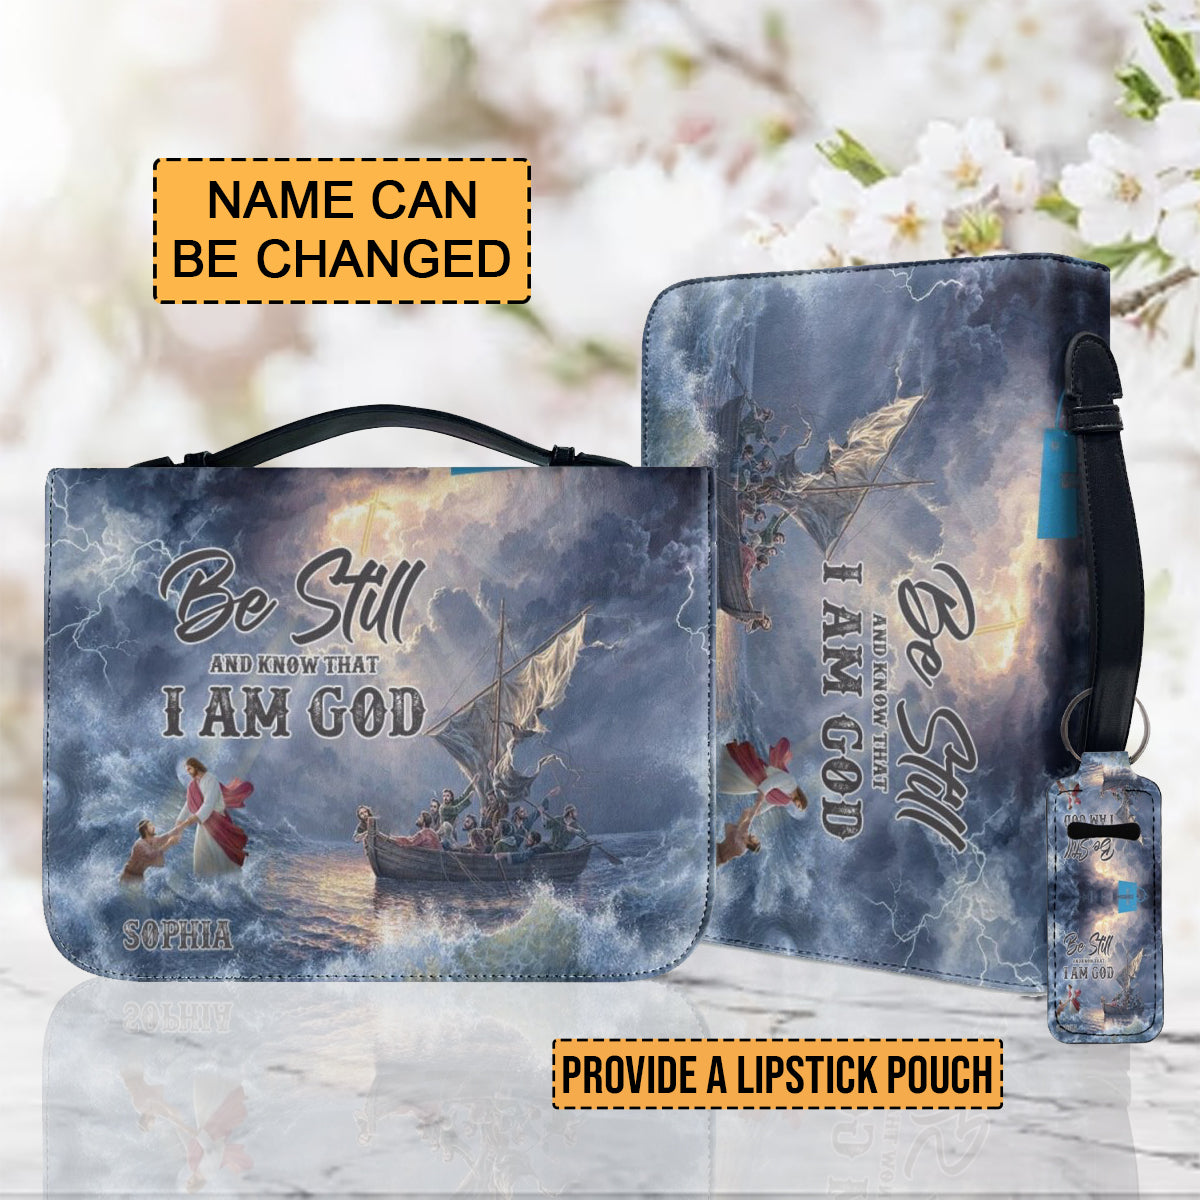 Christianartbag Bible Cover, Be Still And Know That I Am God Personalized Bible Cover, Personalized Bible Cover, Christmas Gift, CABBBCV01060923. - Christian Art Bag